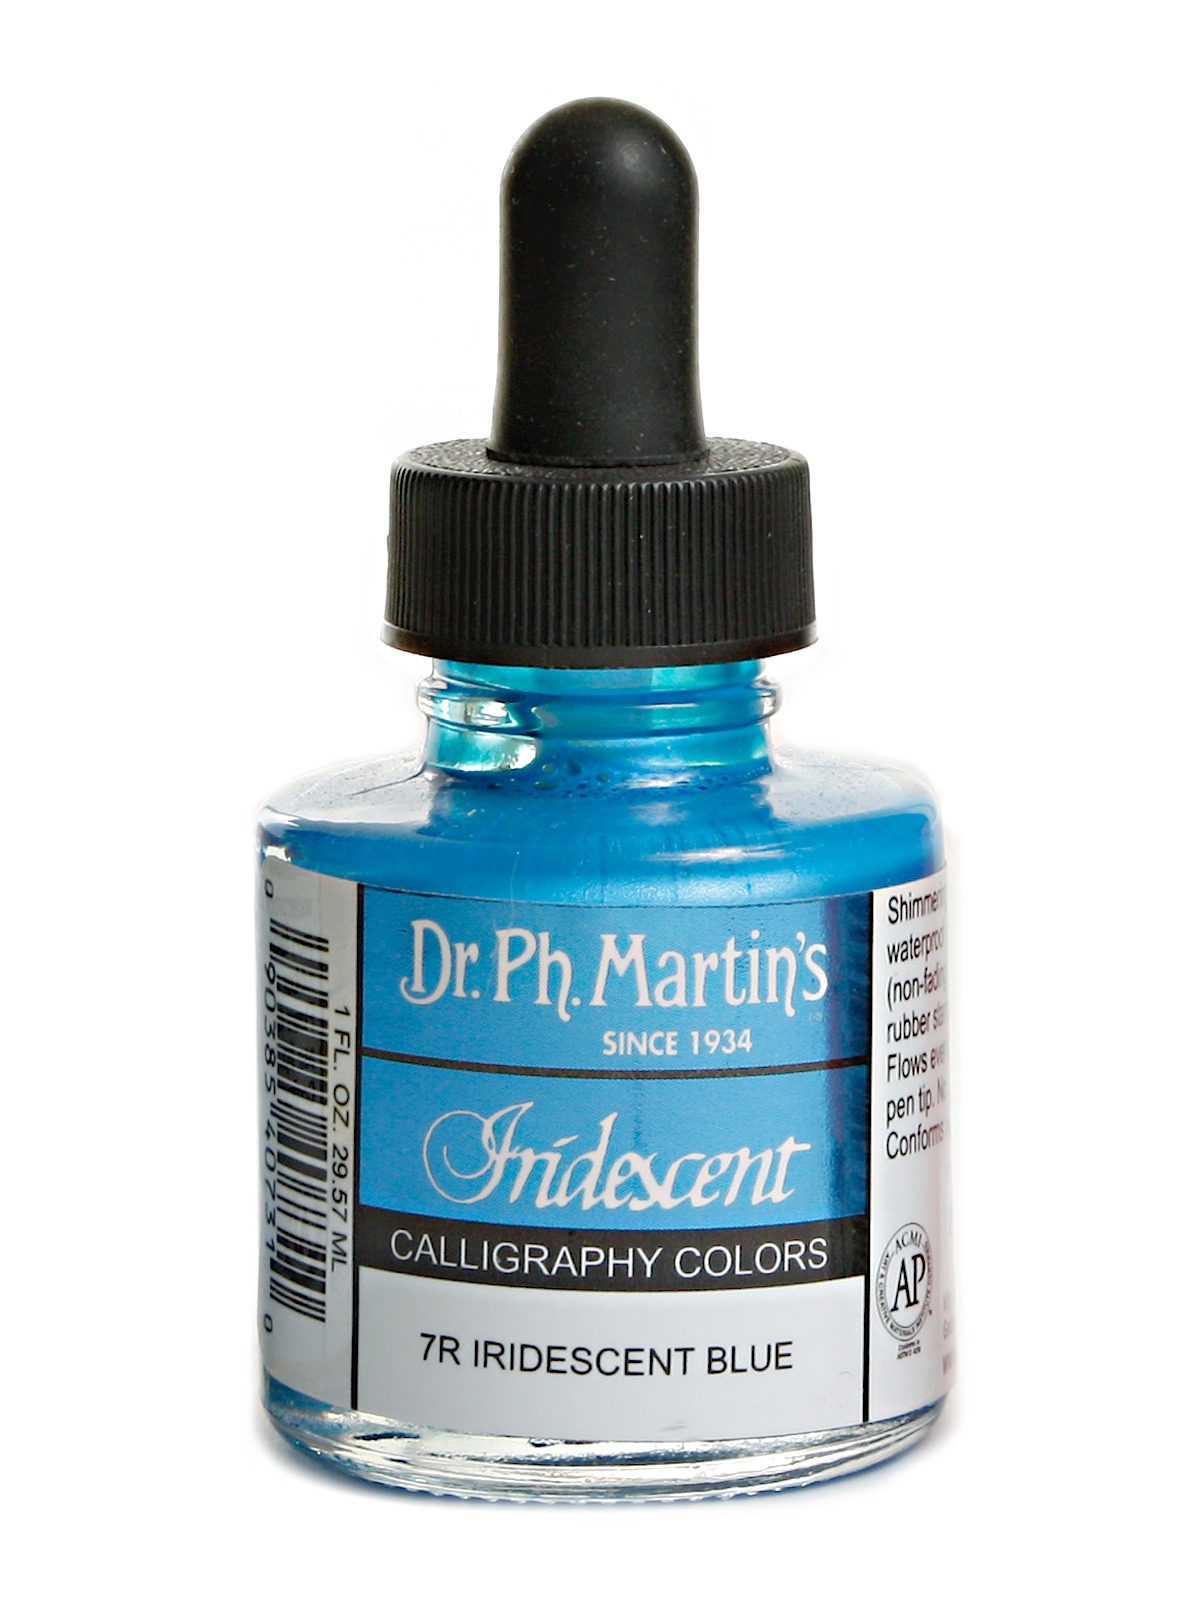 Iridescent Calligraphy Colors 1 Oz. Blue